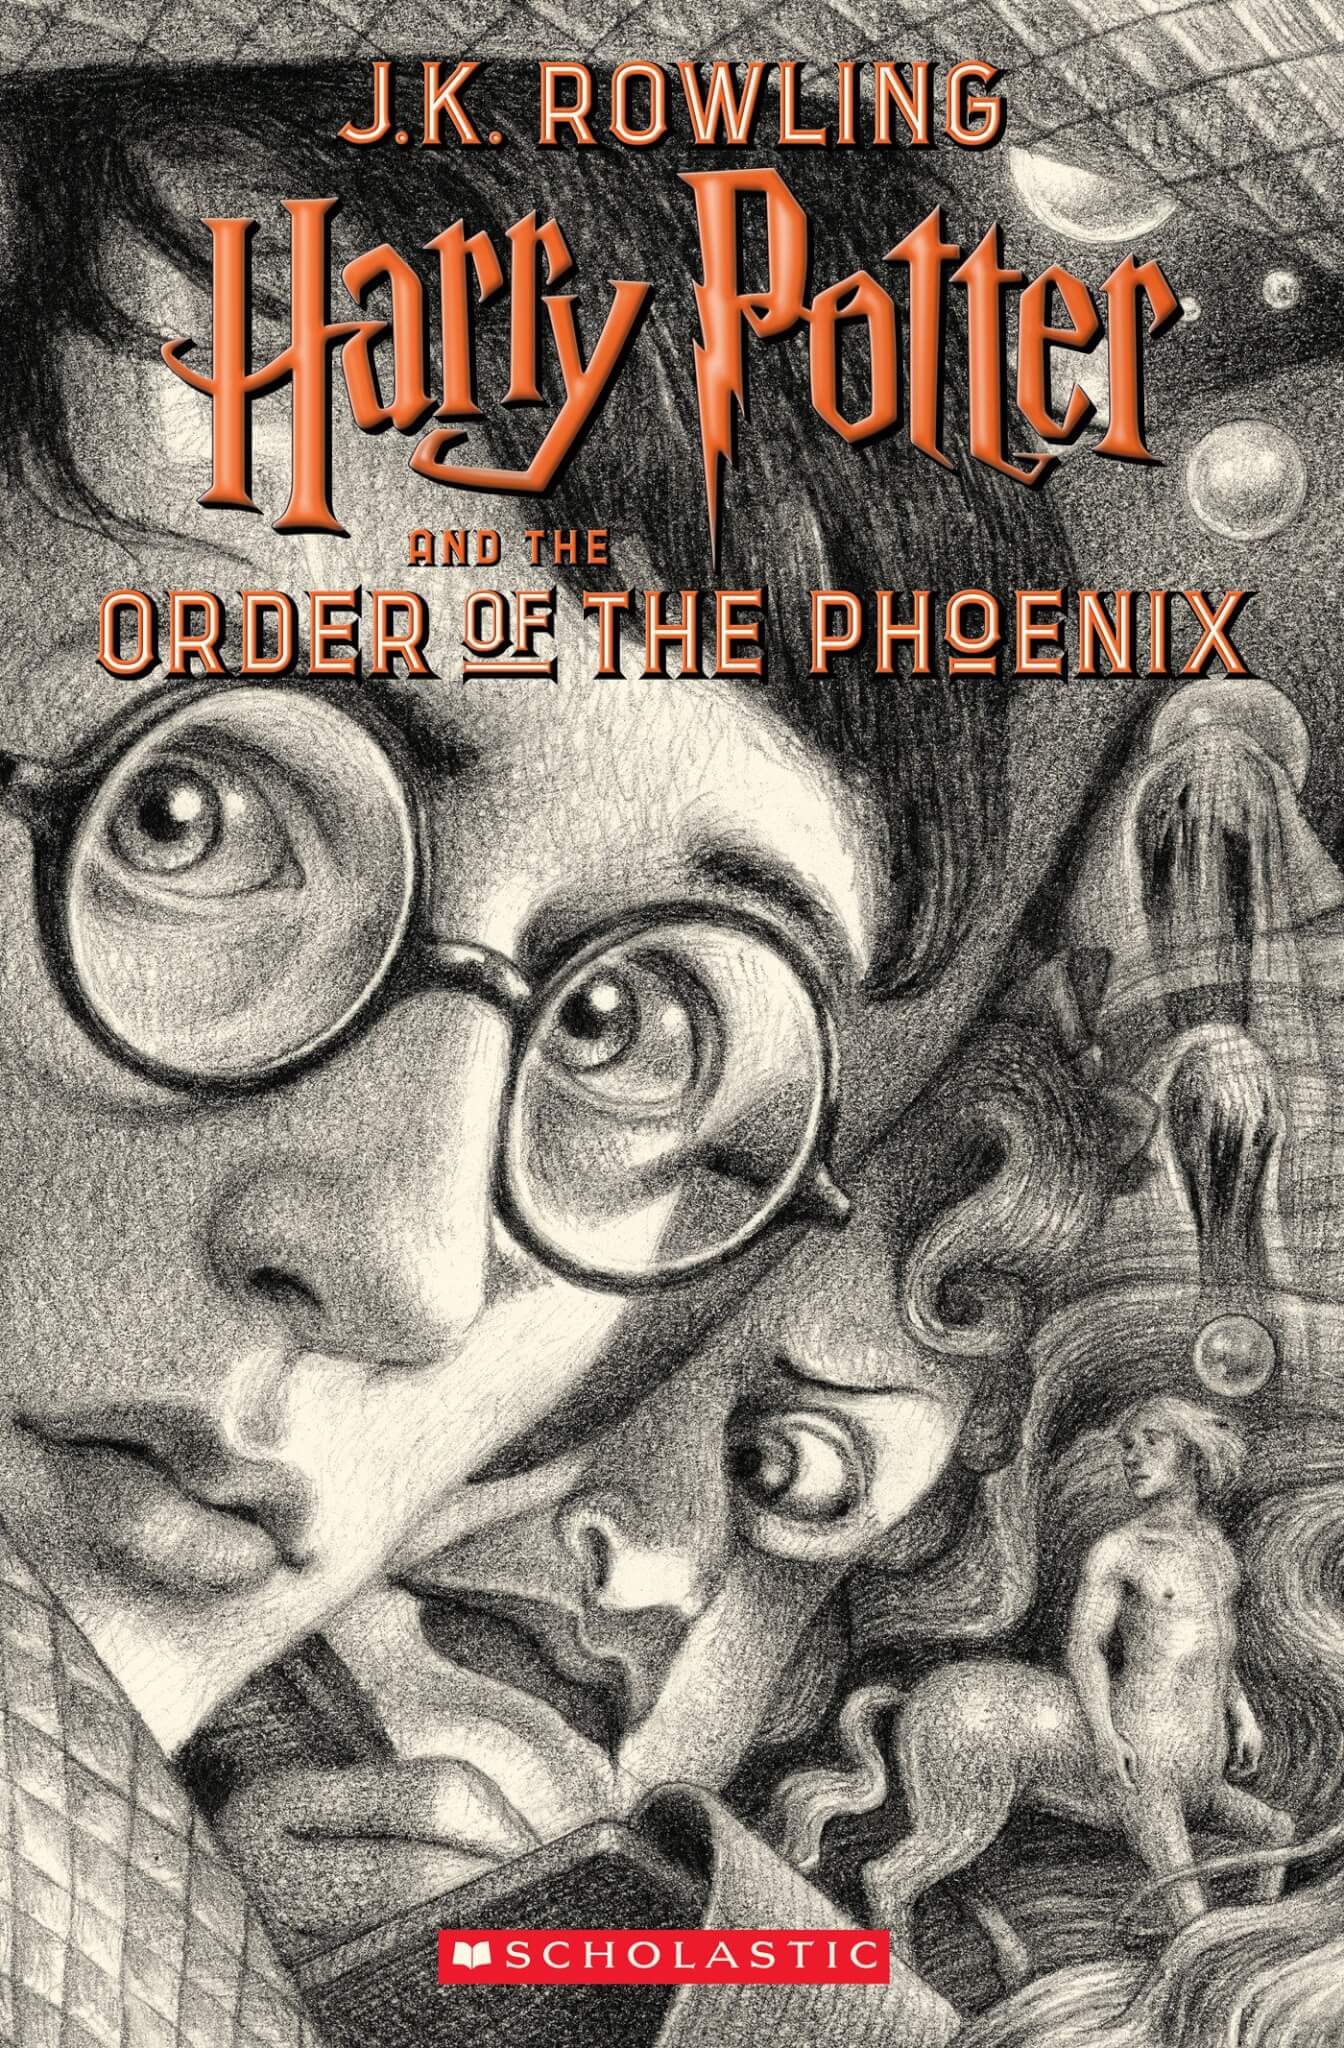 "Harry Potter and the Order of the Phoenix" 